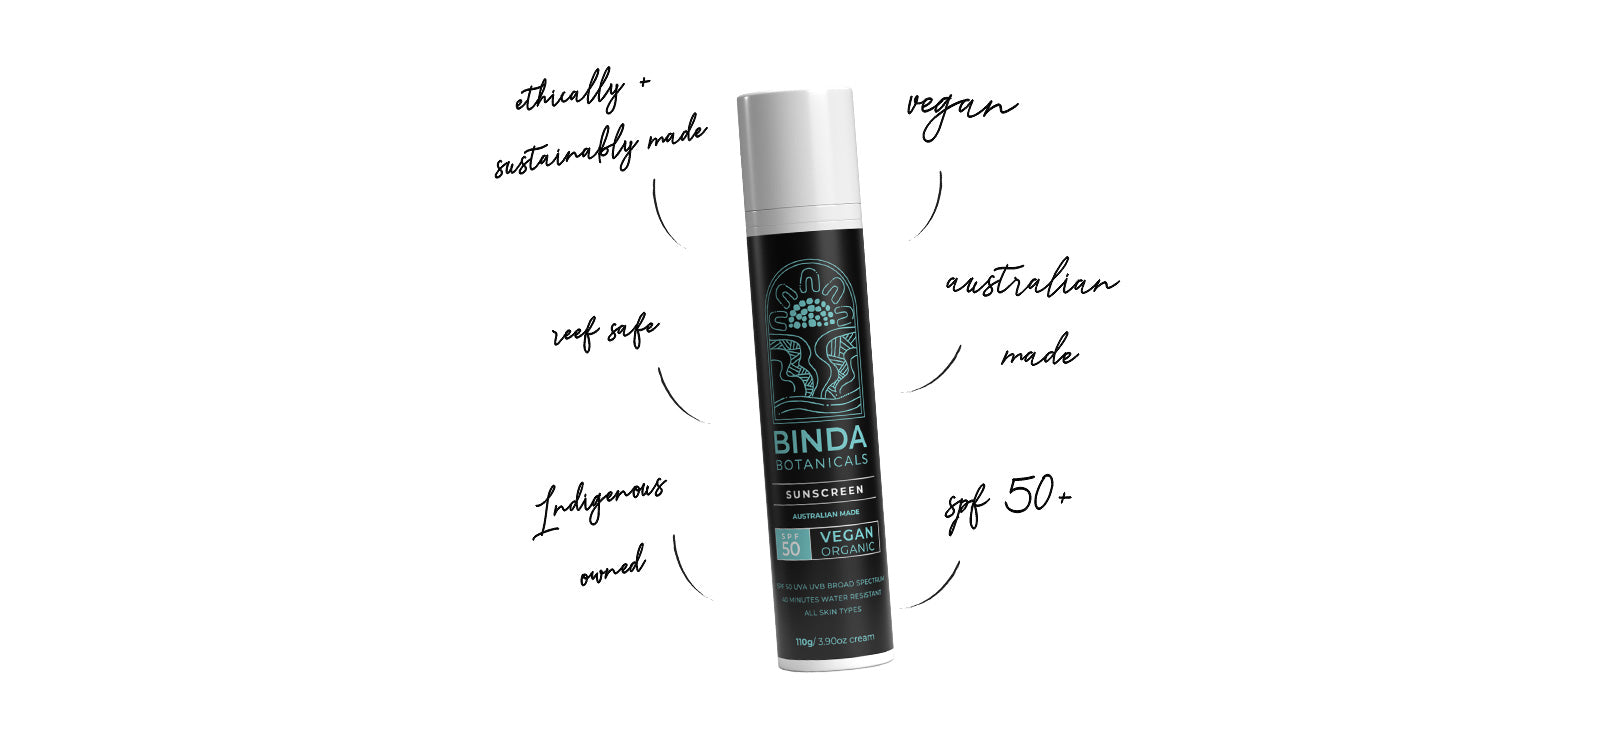 Binda Sunscreen tube with benefits highlighted in text around the image.